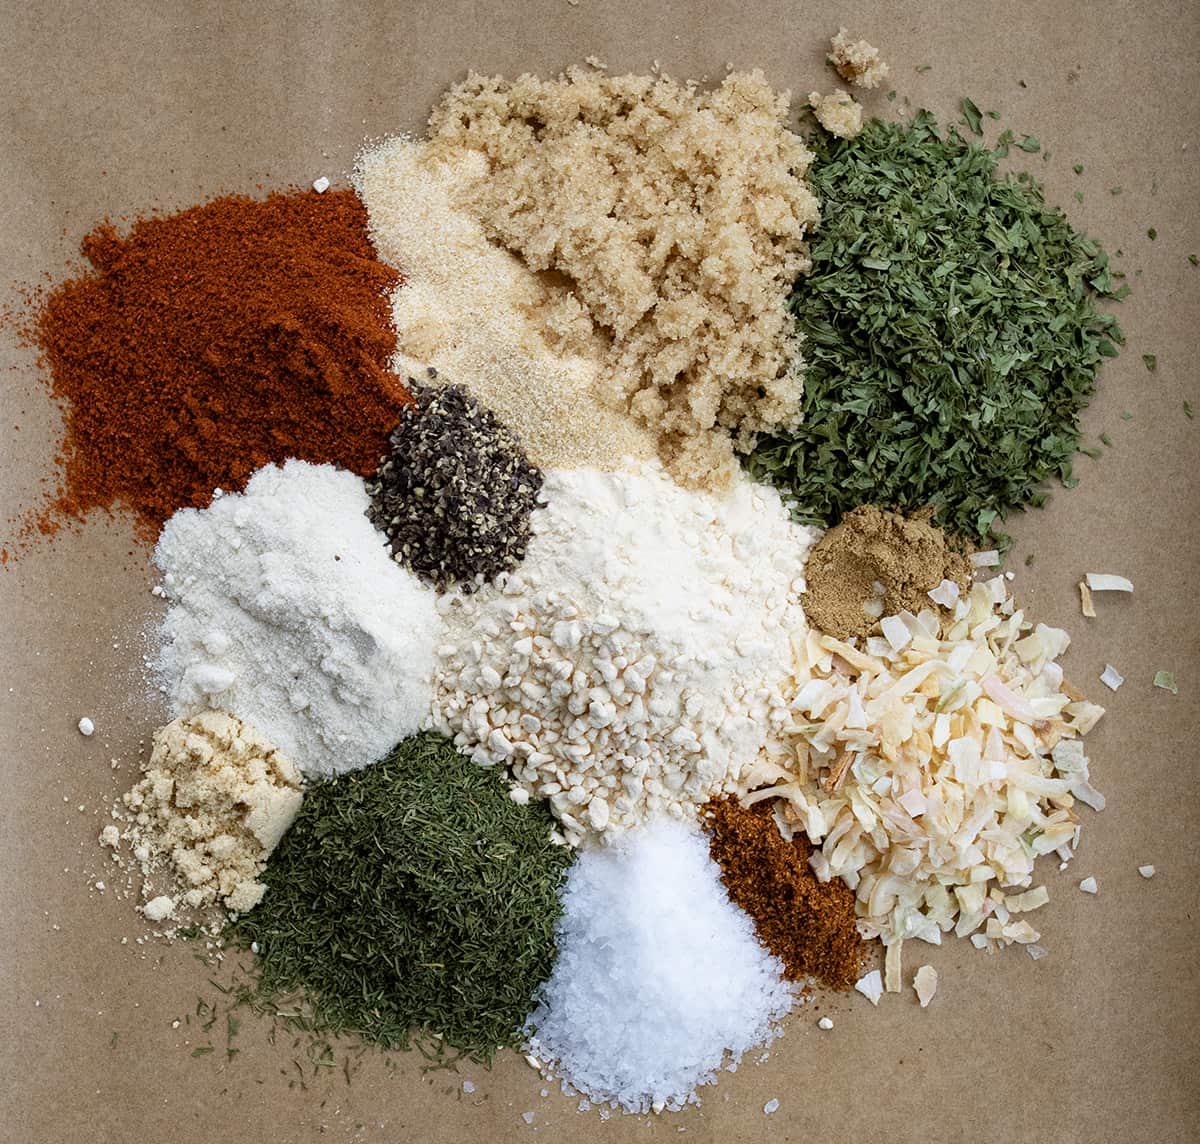 Spices and Seasonings for Cowboy Ranch Seasoning Blend.